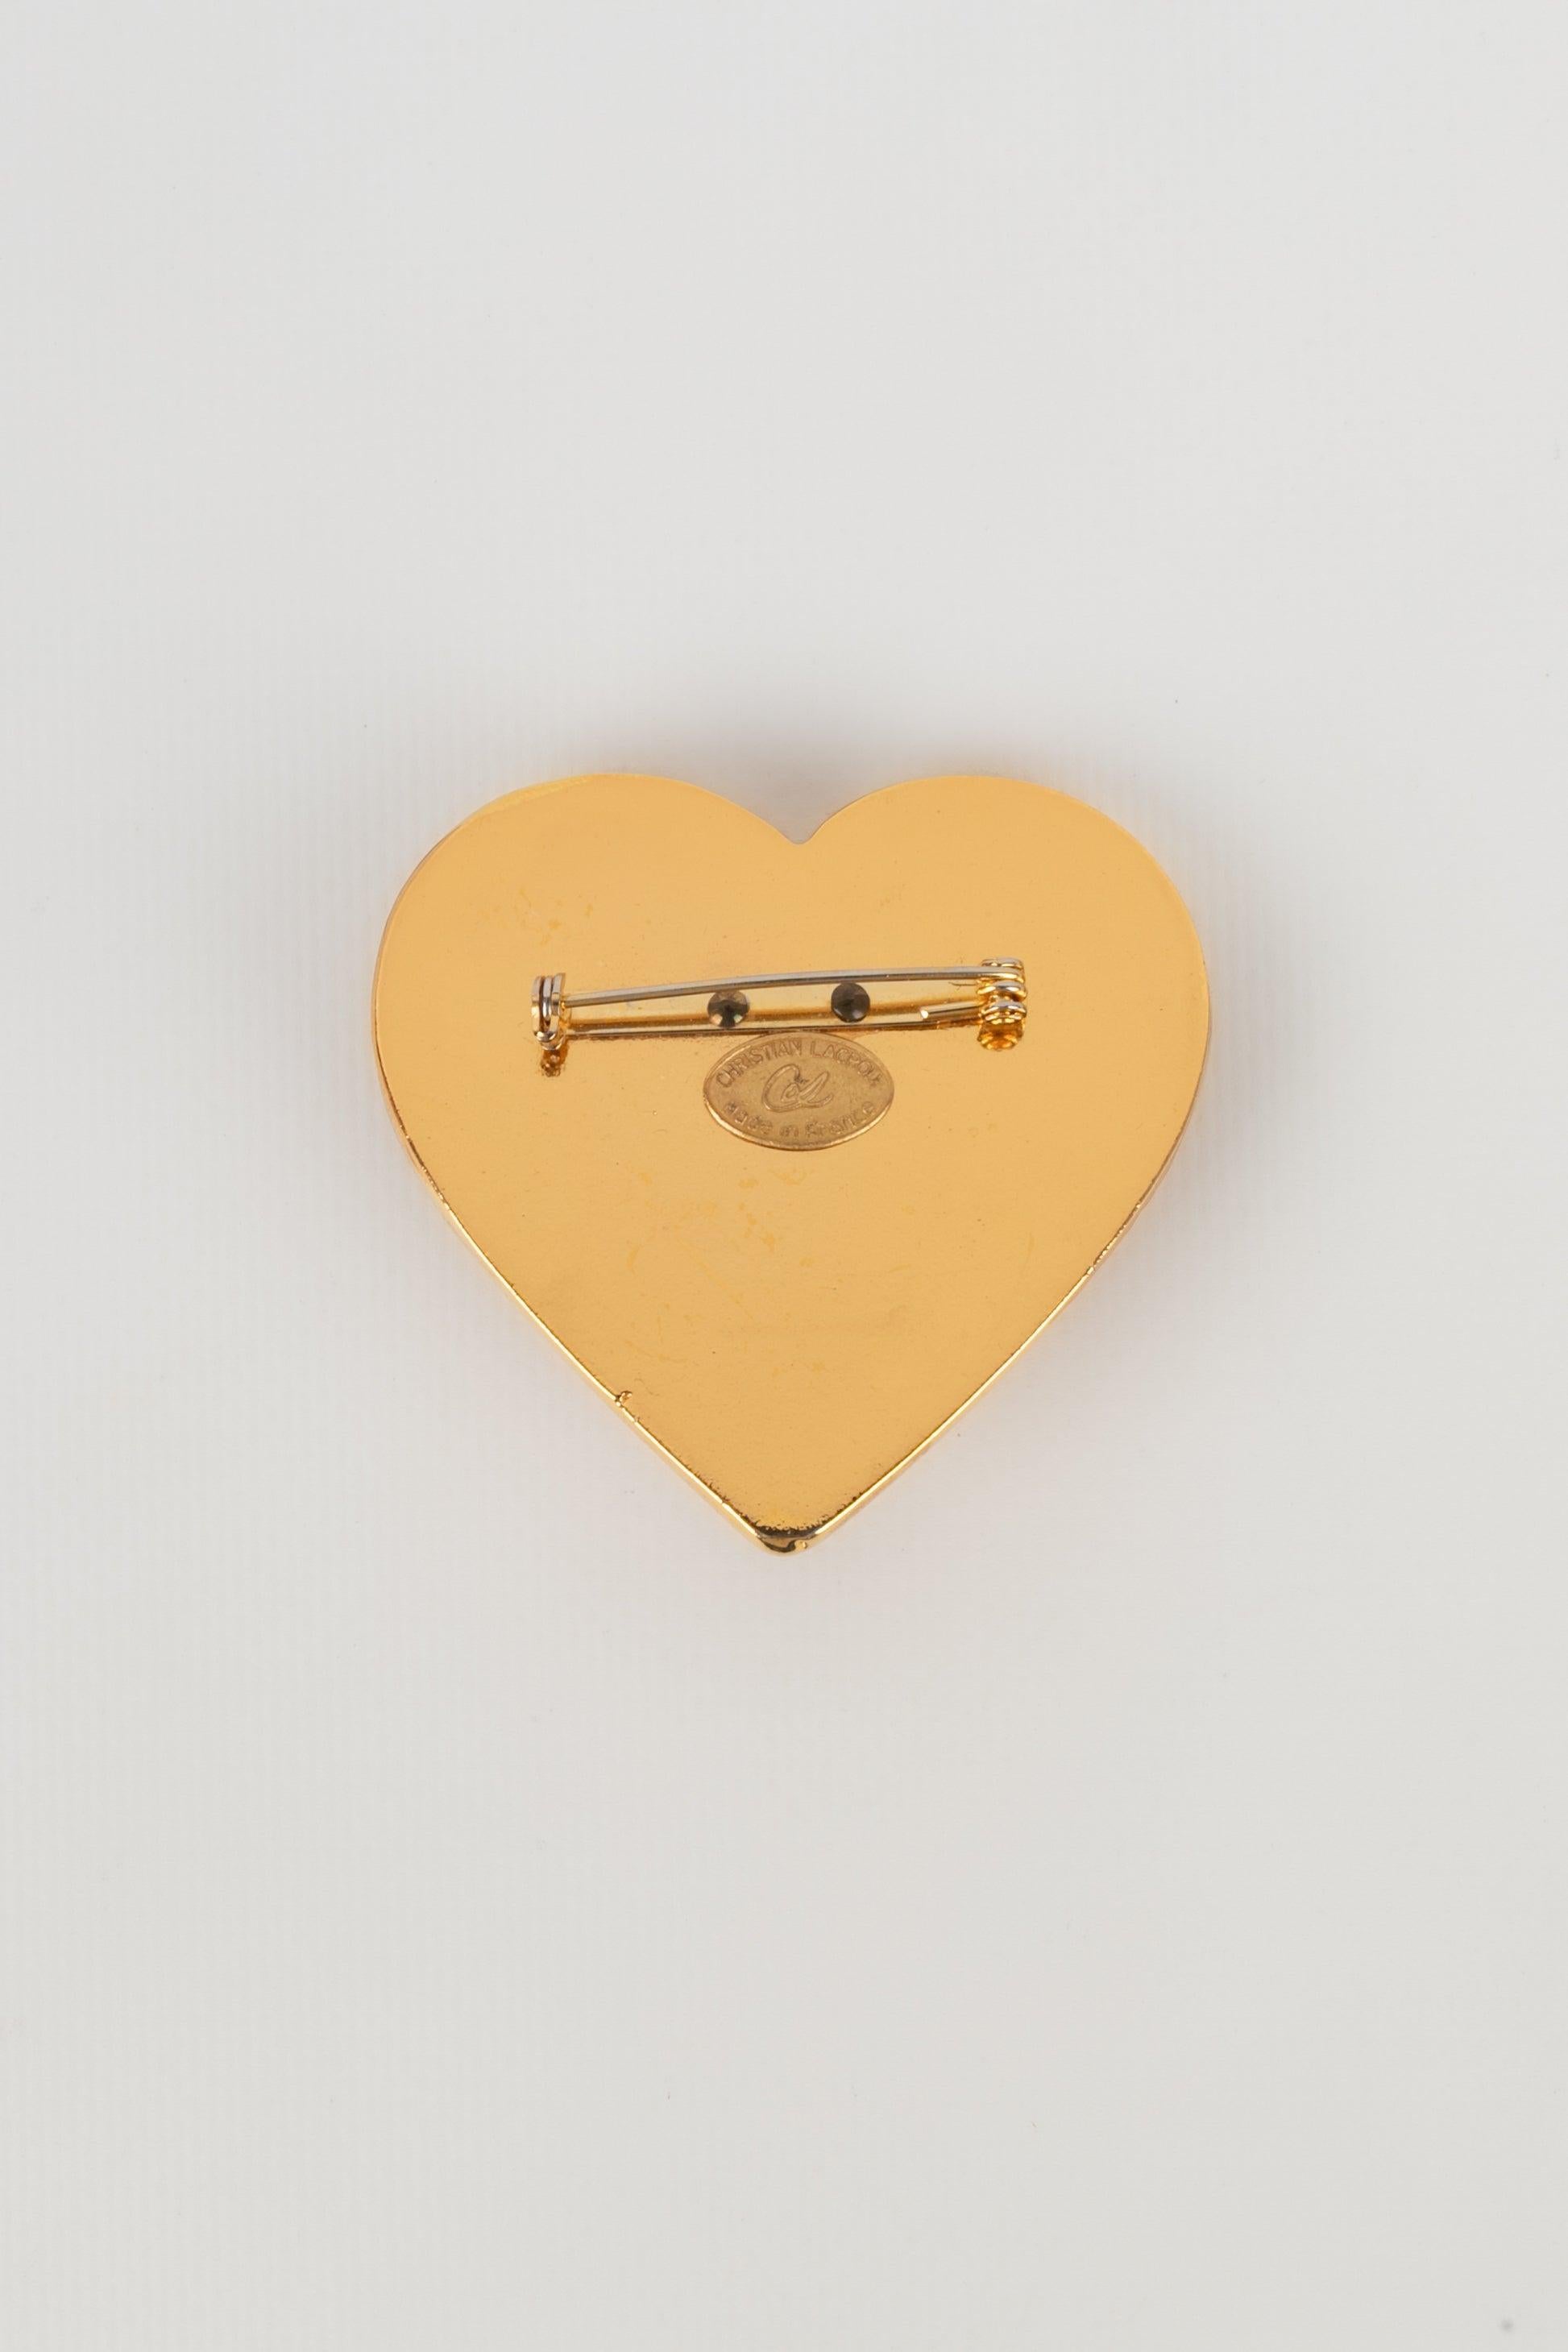 Women's Christian Lacroix Brooch in Gilded Metal Depicting a Heart, Mid-1990s For Sale